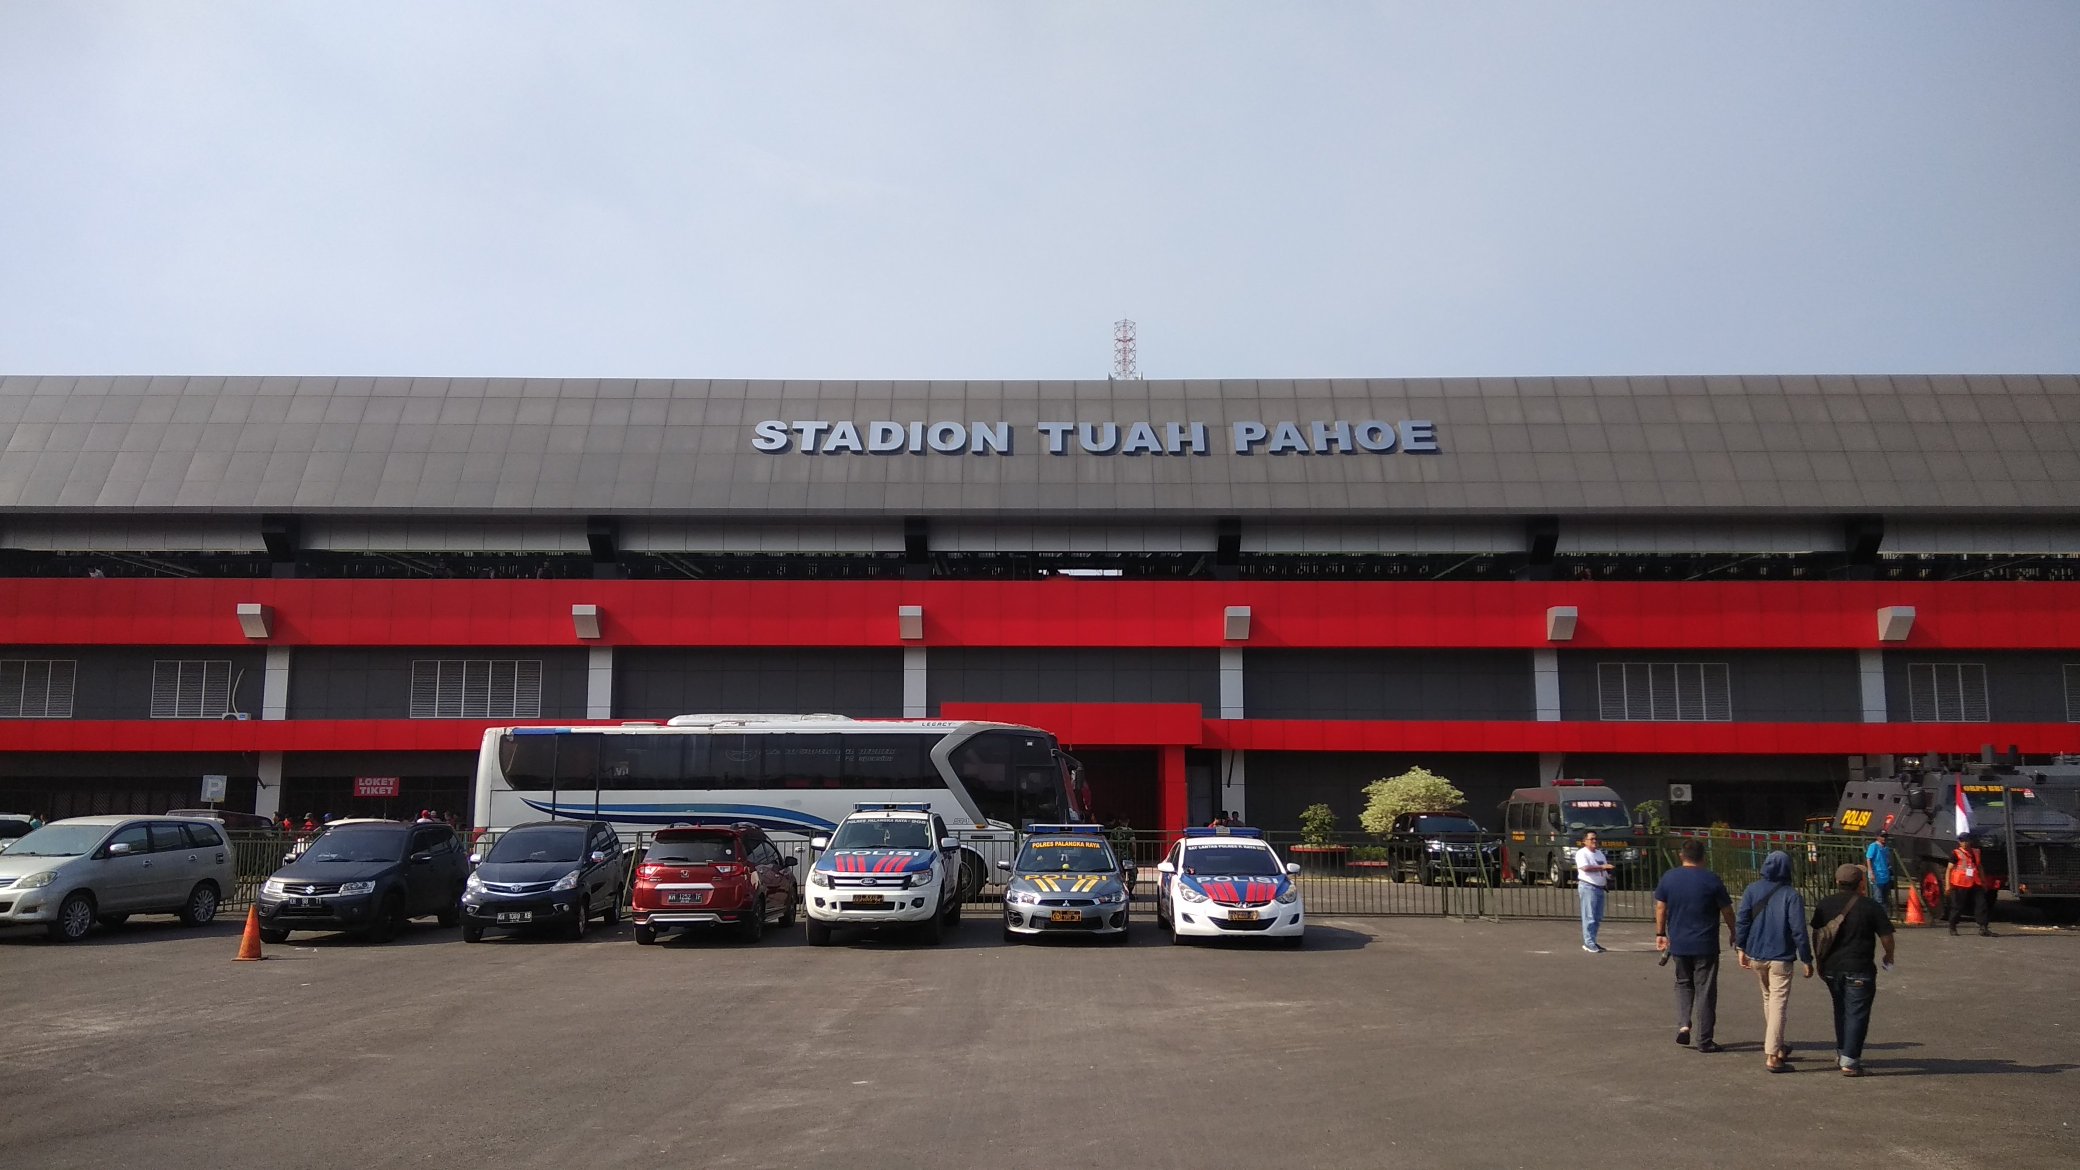 13-intriguing-facts-about-tuah-pahoe-stadium